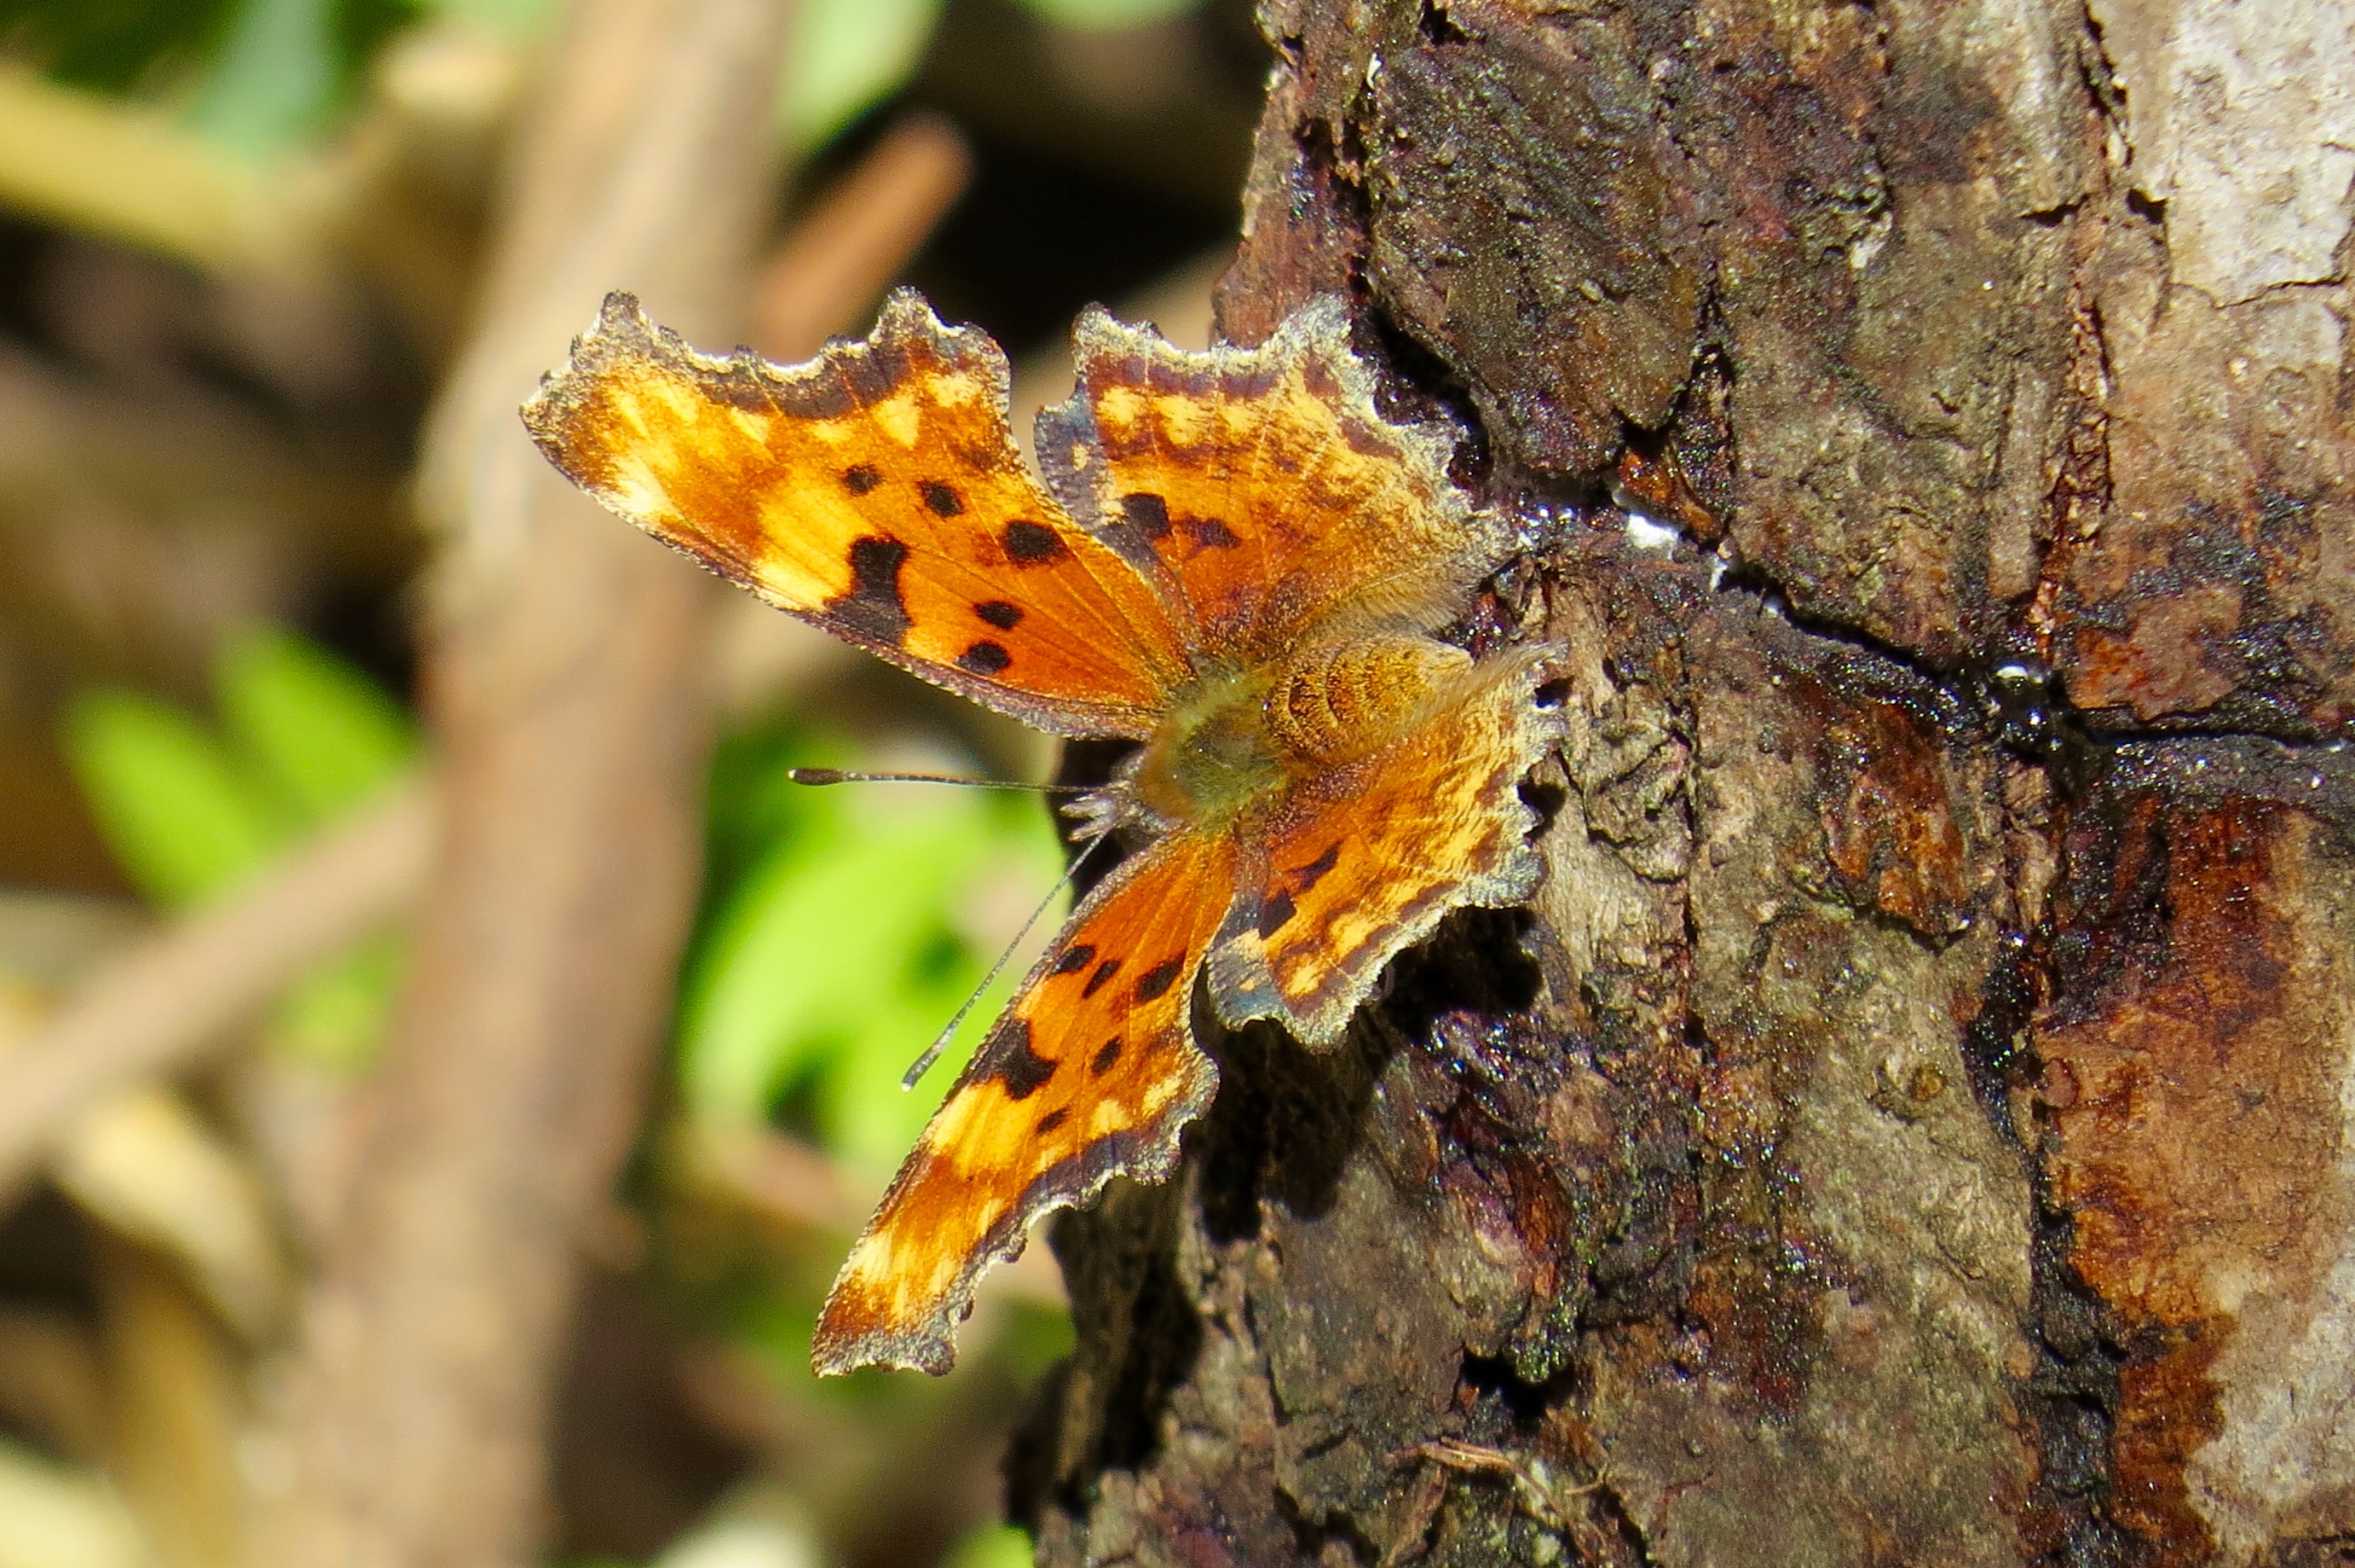 This gorgeous Question Mark butterfly (Polygonia interrogationis) is eating sap from the "sap well" that was drilled by a sapsucker. Ajax Trail, Aspen Mountain